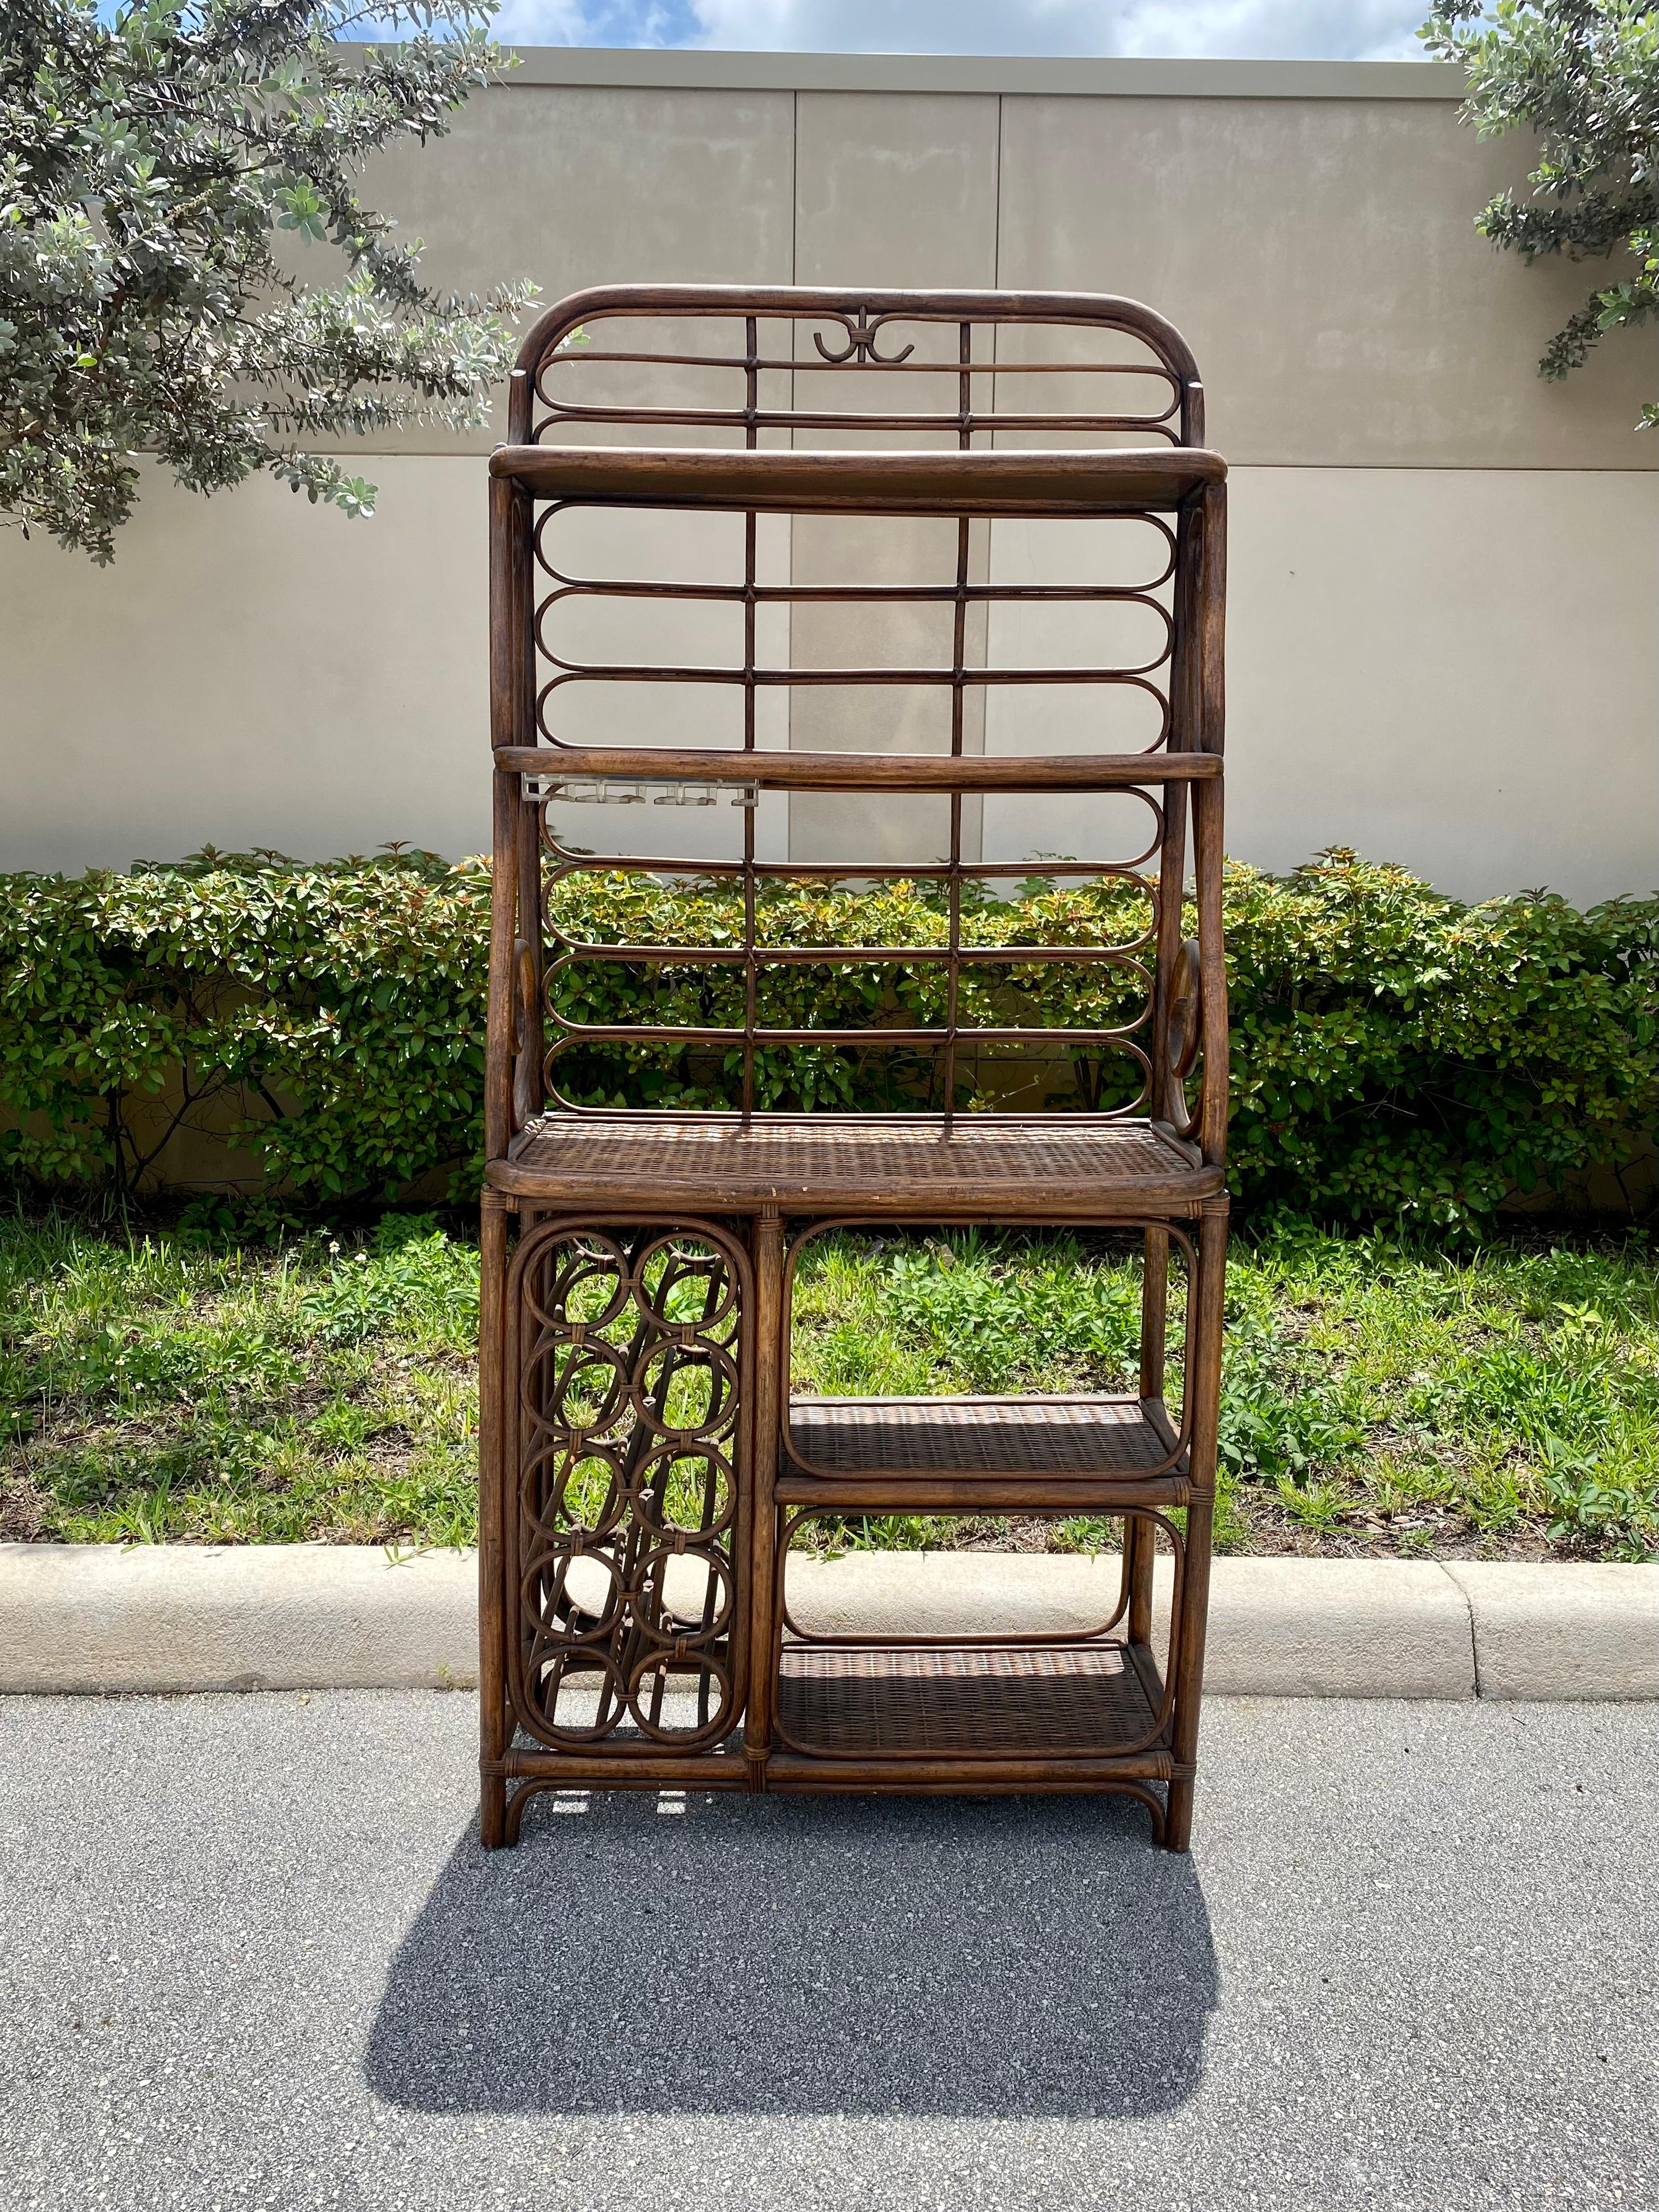 The beautiful rare rattan bar or bakers rack is statement piece which is packed with personality!  Just look at the details on this beauty! The rack was individually produced and finished with the highest level of hand craftsmanship. The display